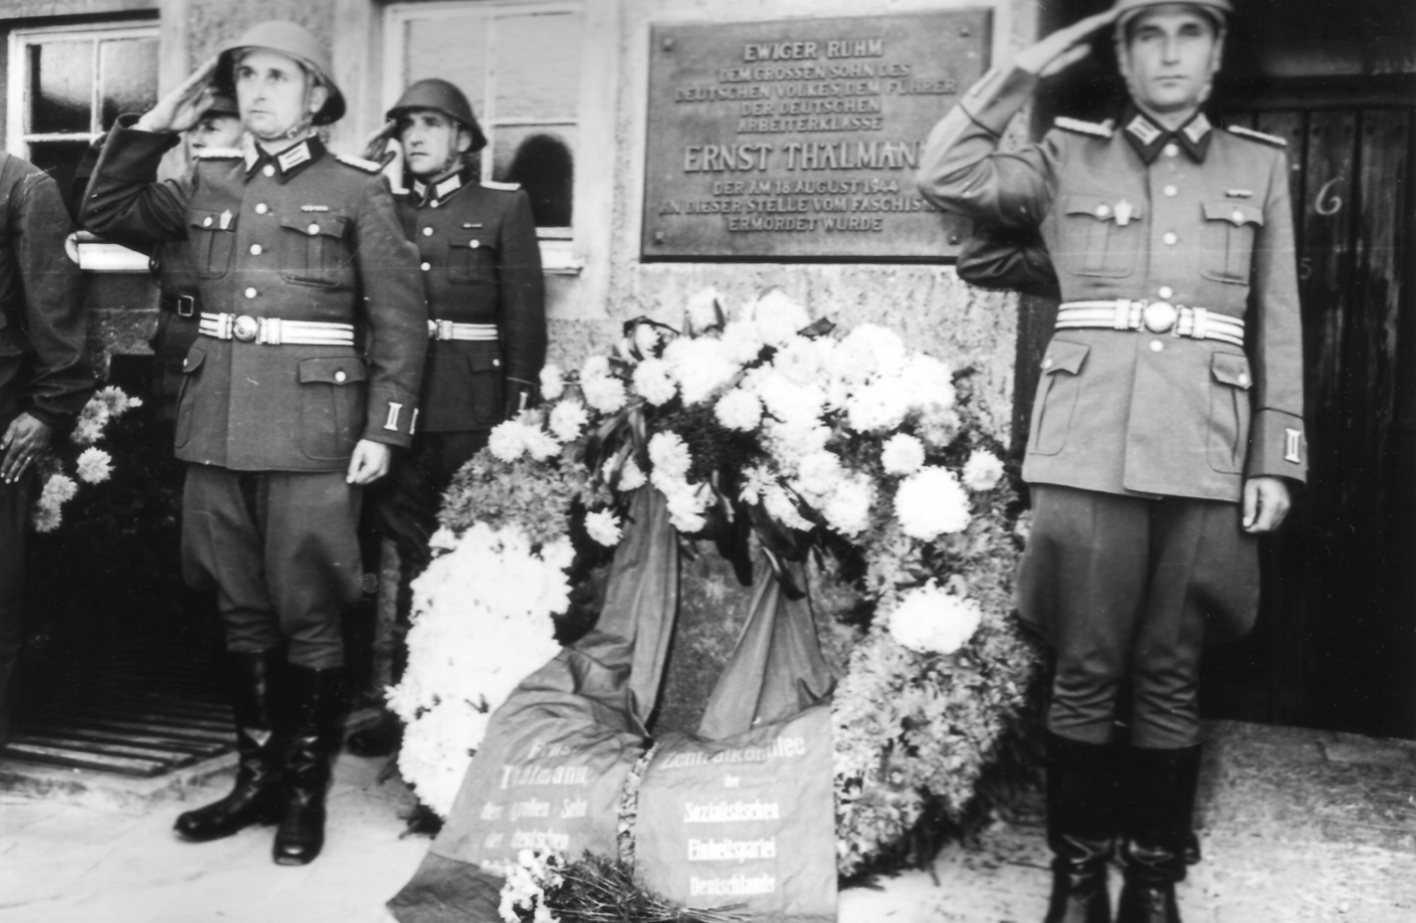 Three soldiers of the NVA salute around a wreath laid in front of the memorial plaque for Ernst Thälmann at the crematorium.